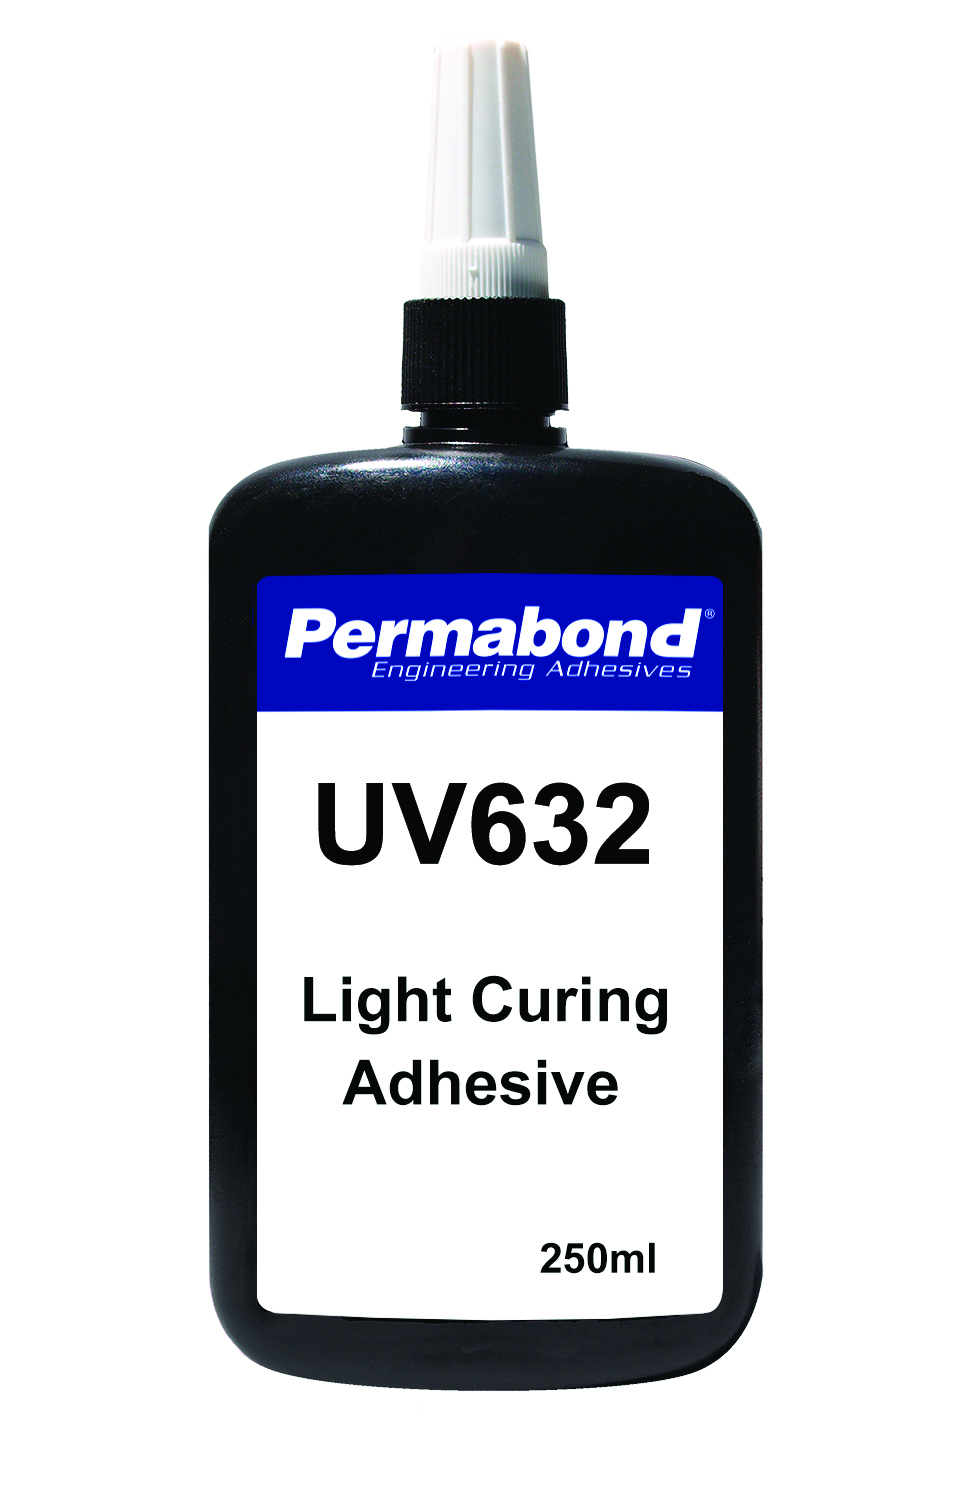 UV curing resin adhesive glue for acrylic bonding - Adhesive Tape